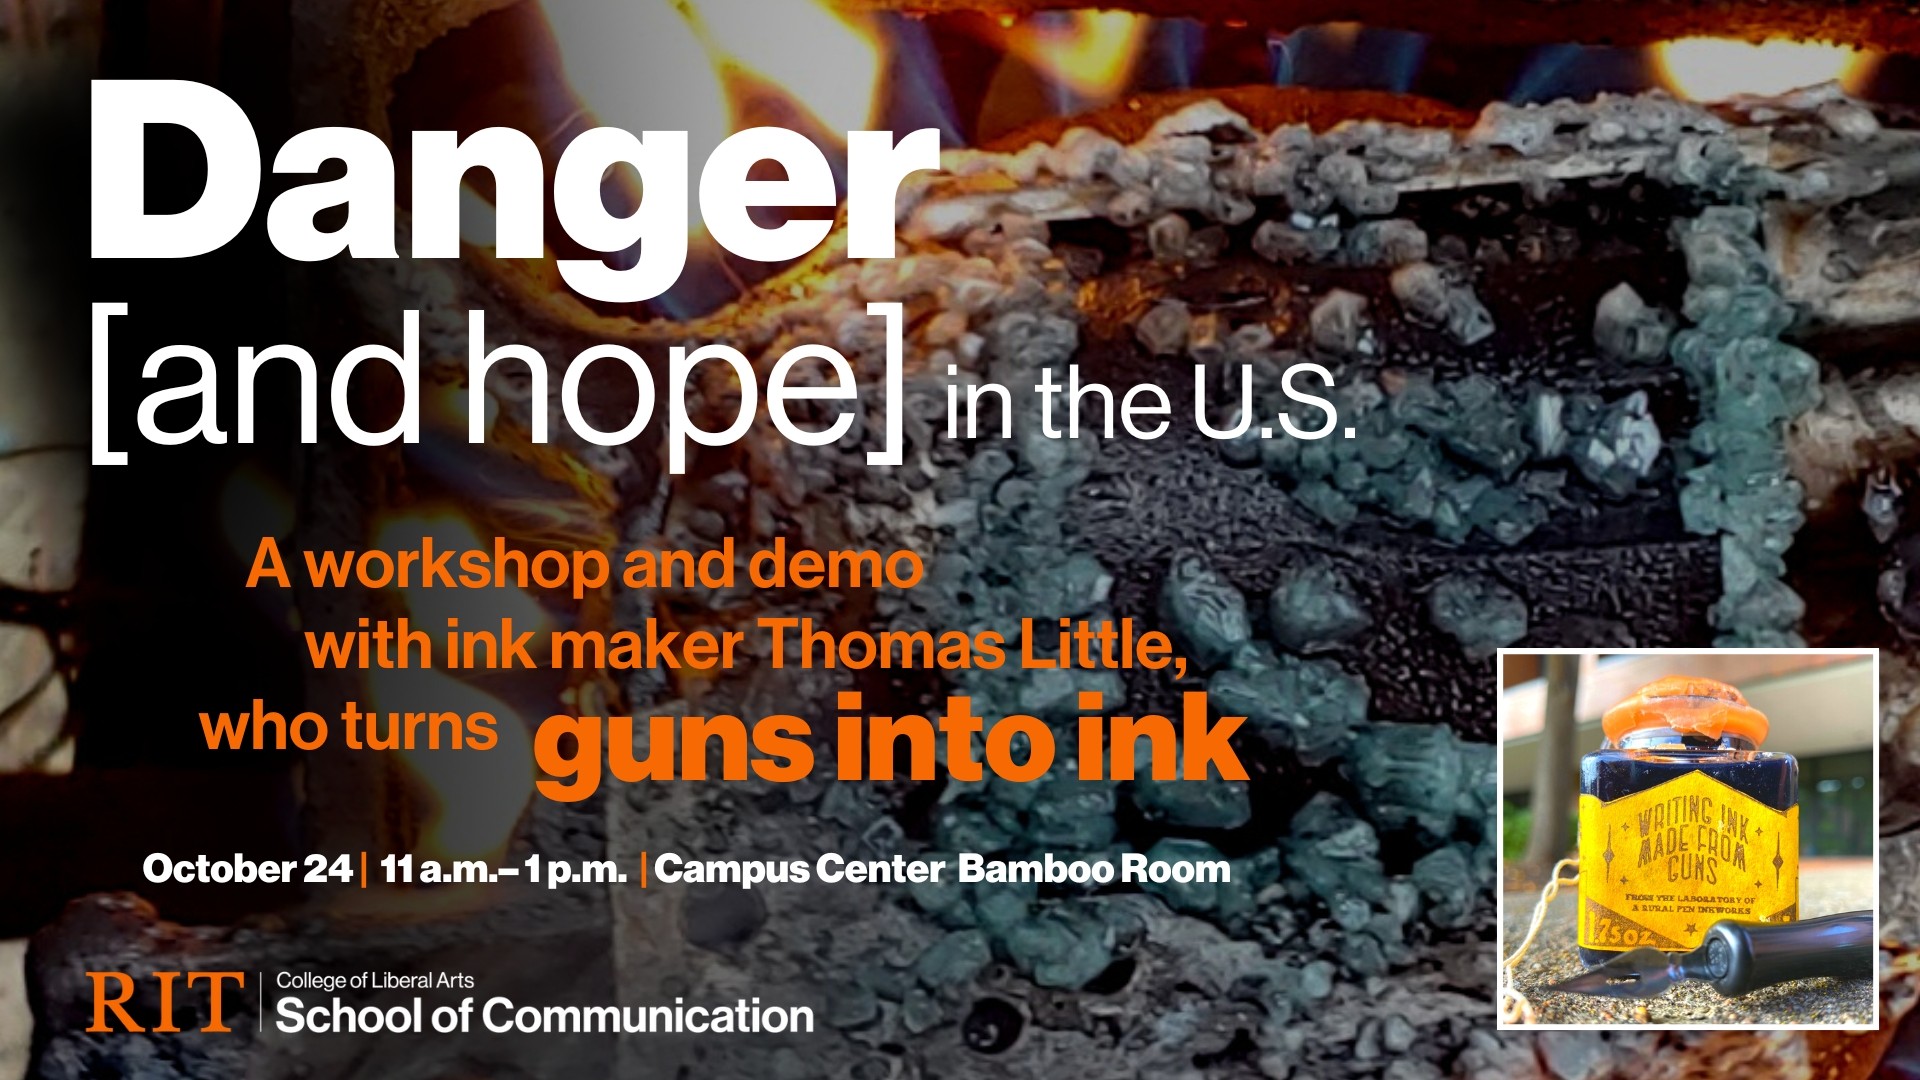 a photo of a gun crystallizing over fire with text danger and hope in the us